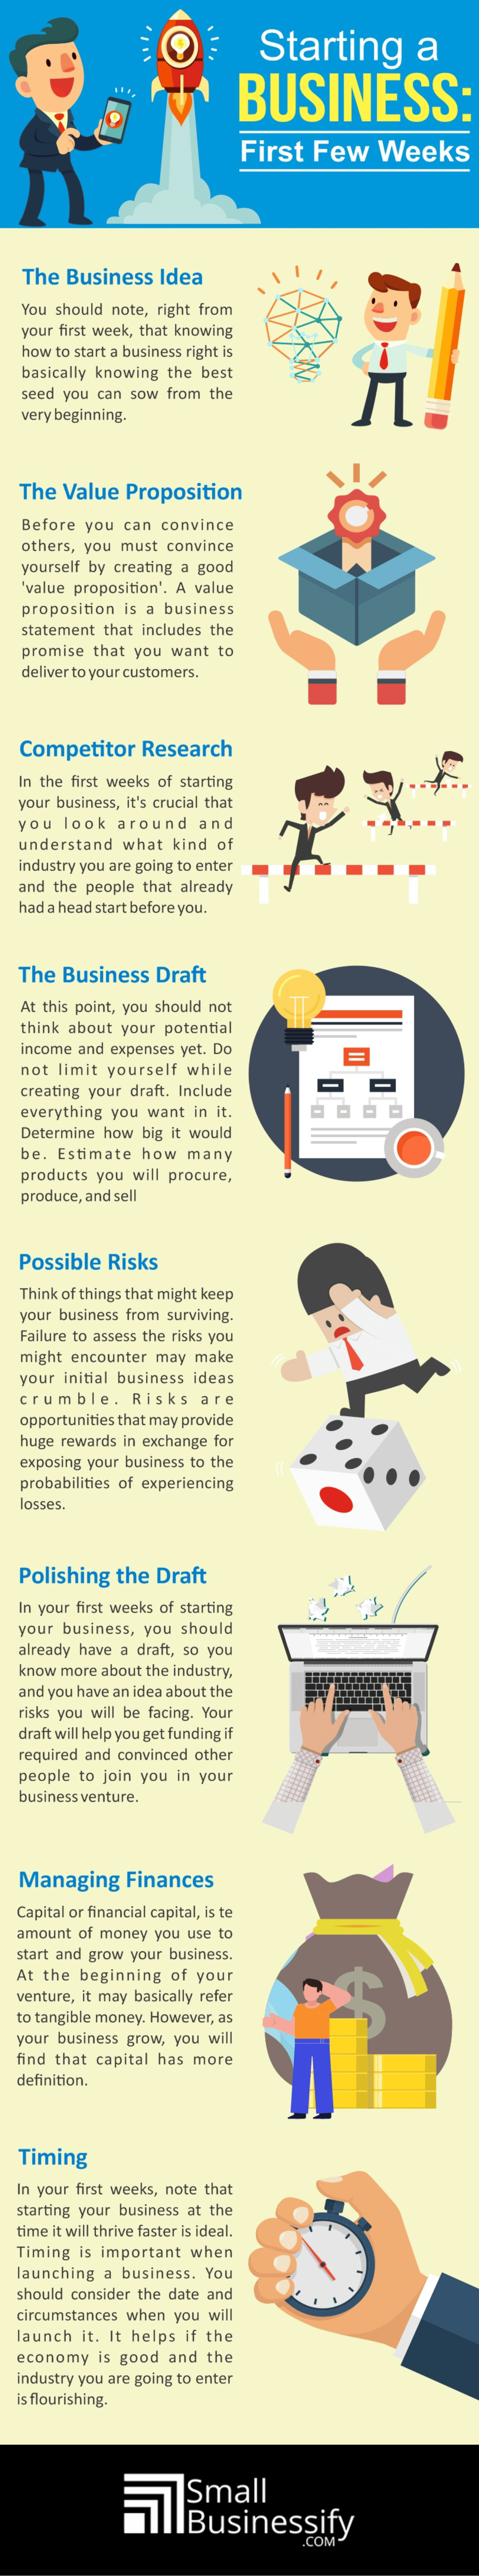 Starting a Business The First Few Weeks Infographic